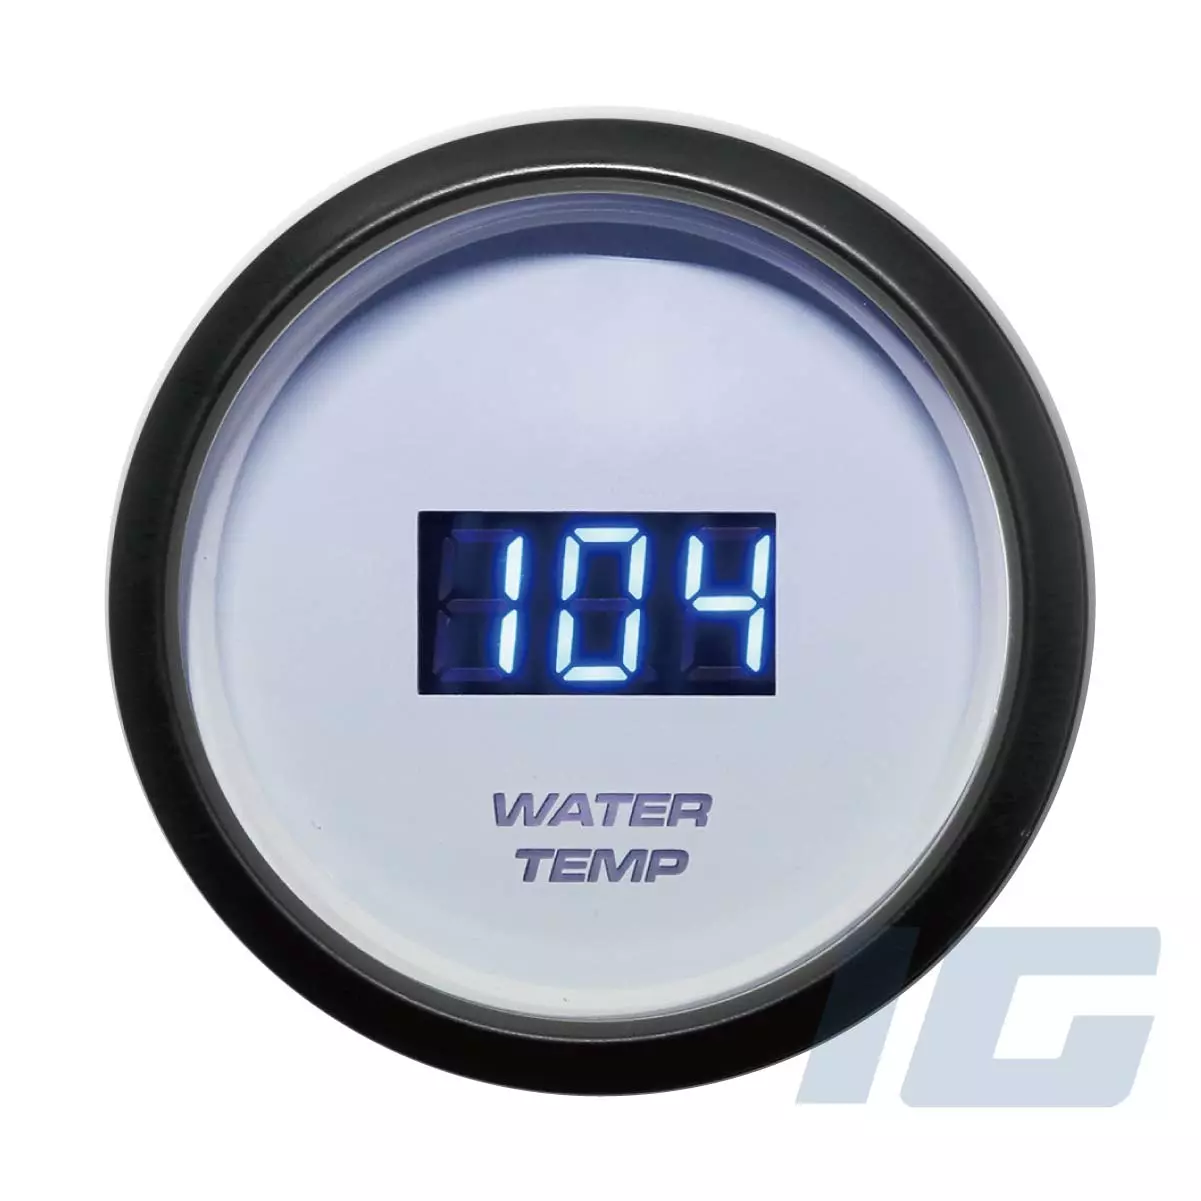 igauge, MGS Series, 52mm, Digital, White Face, Aftermarket, Marine, Gauge, Boat, Outboard, Water Temperature, kit